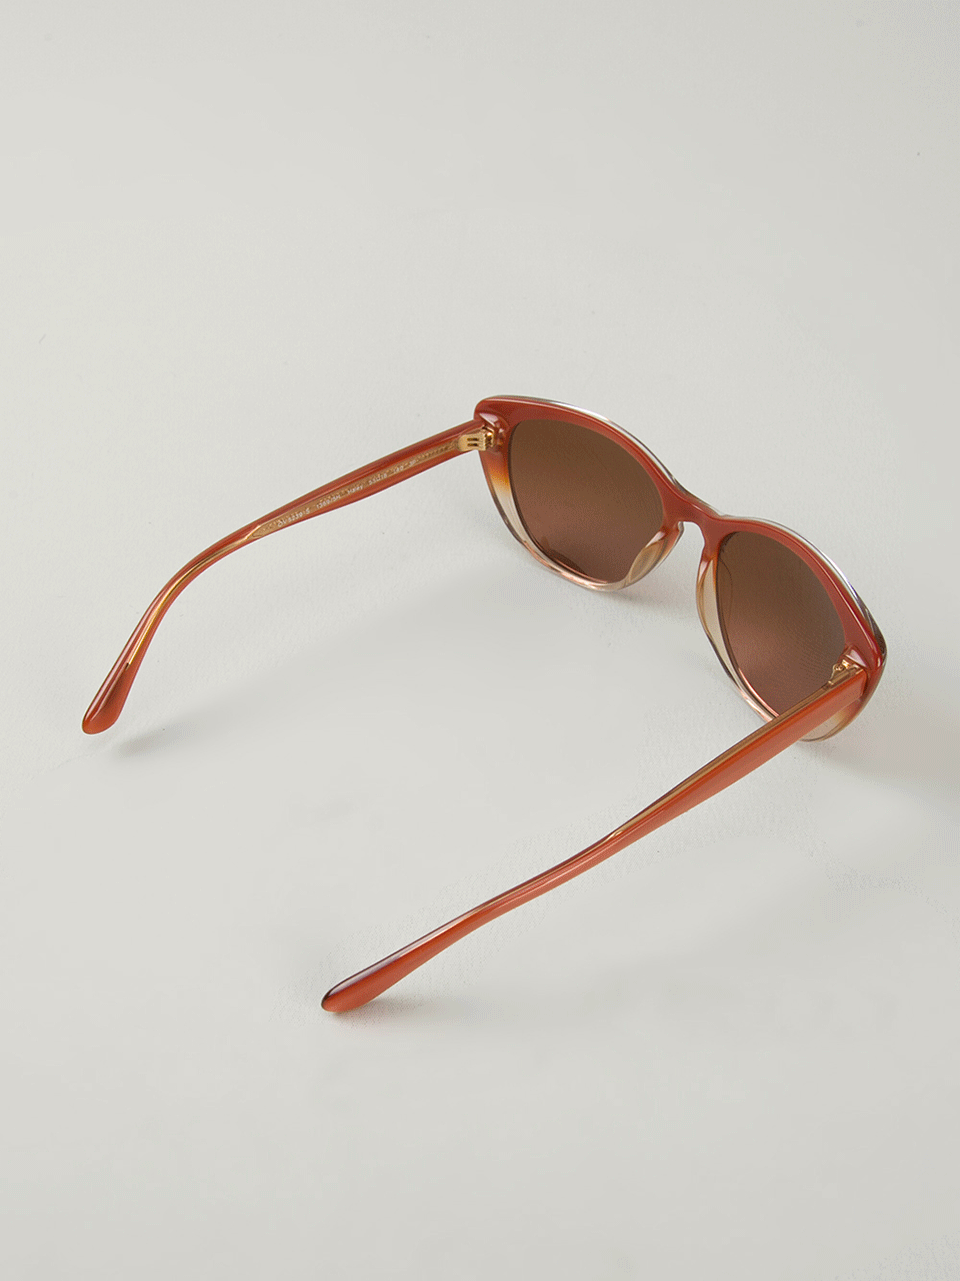 OLIVER PEOPLES-Hayley Cat Eye Sunglasses-COPPER